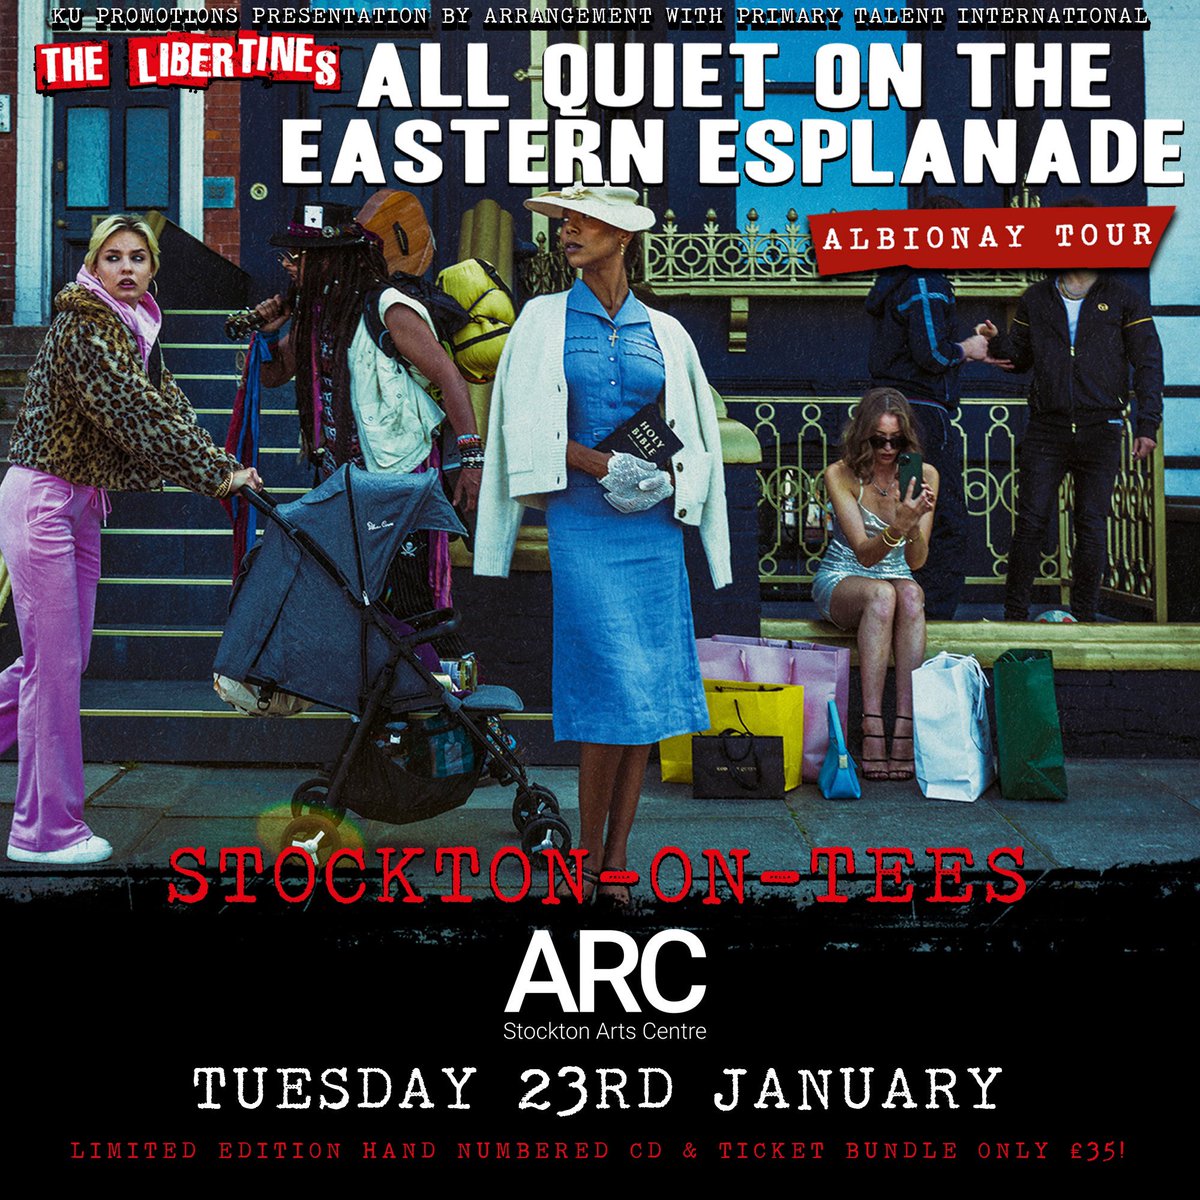 📣 MASSIVE ANNOUNCEMENT 📣 THE LIBERTINES ARE COMING TO STOCKTON You read that right, they’ll be playing a show at ARC - Tuesday 23rd January 🗓️ 🎫 Tickets go on sale Tuesday 14th November at 10am and will be sold via townsendmusic.store